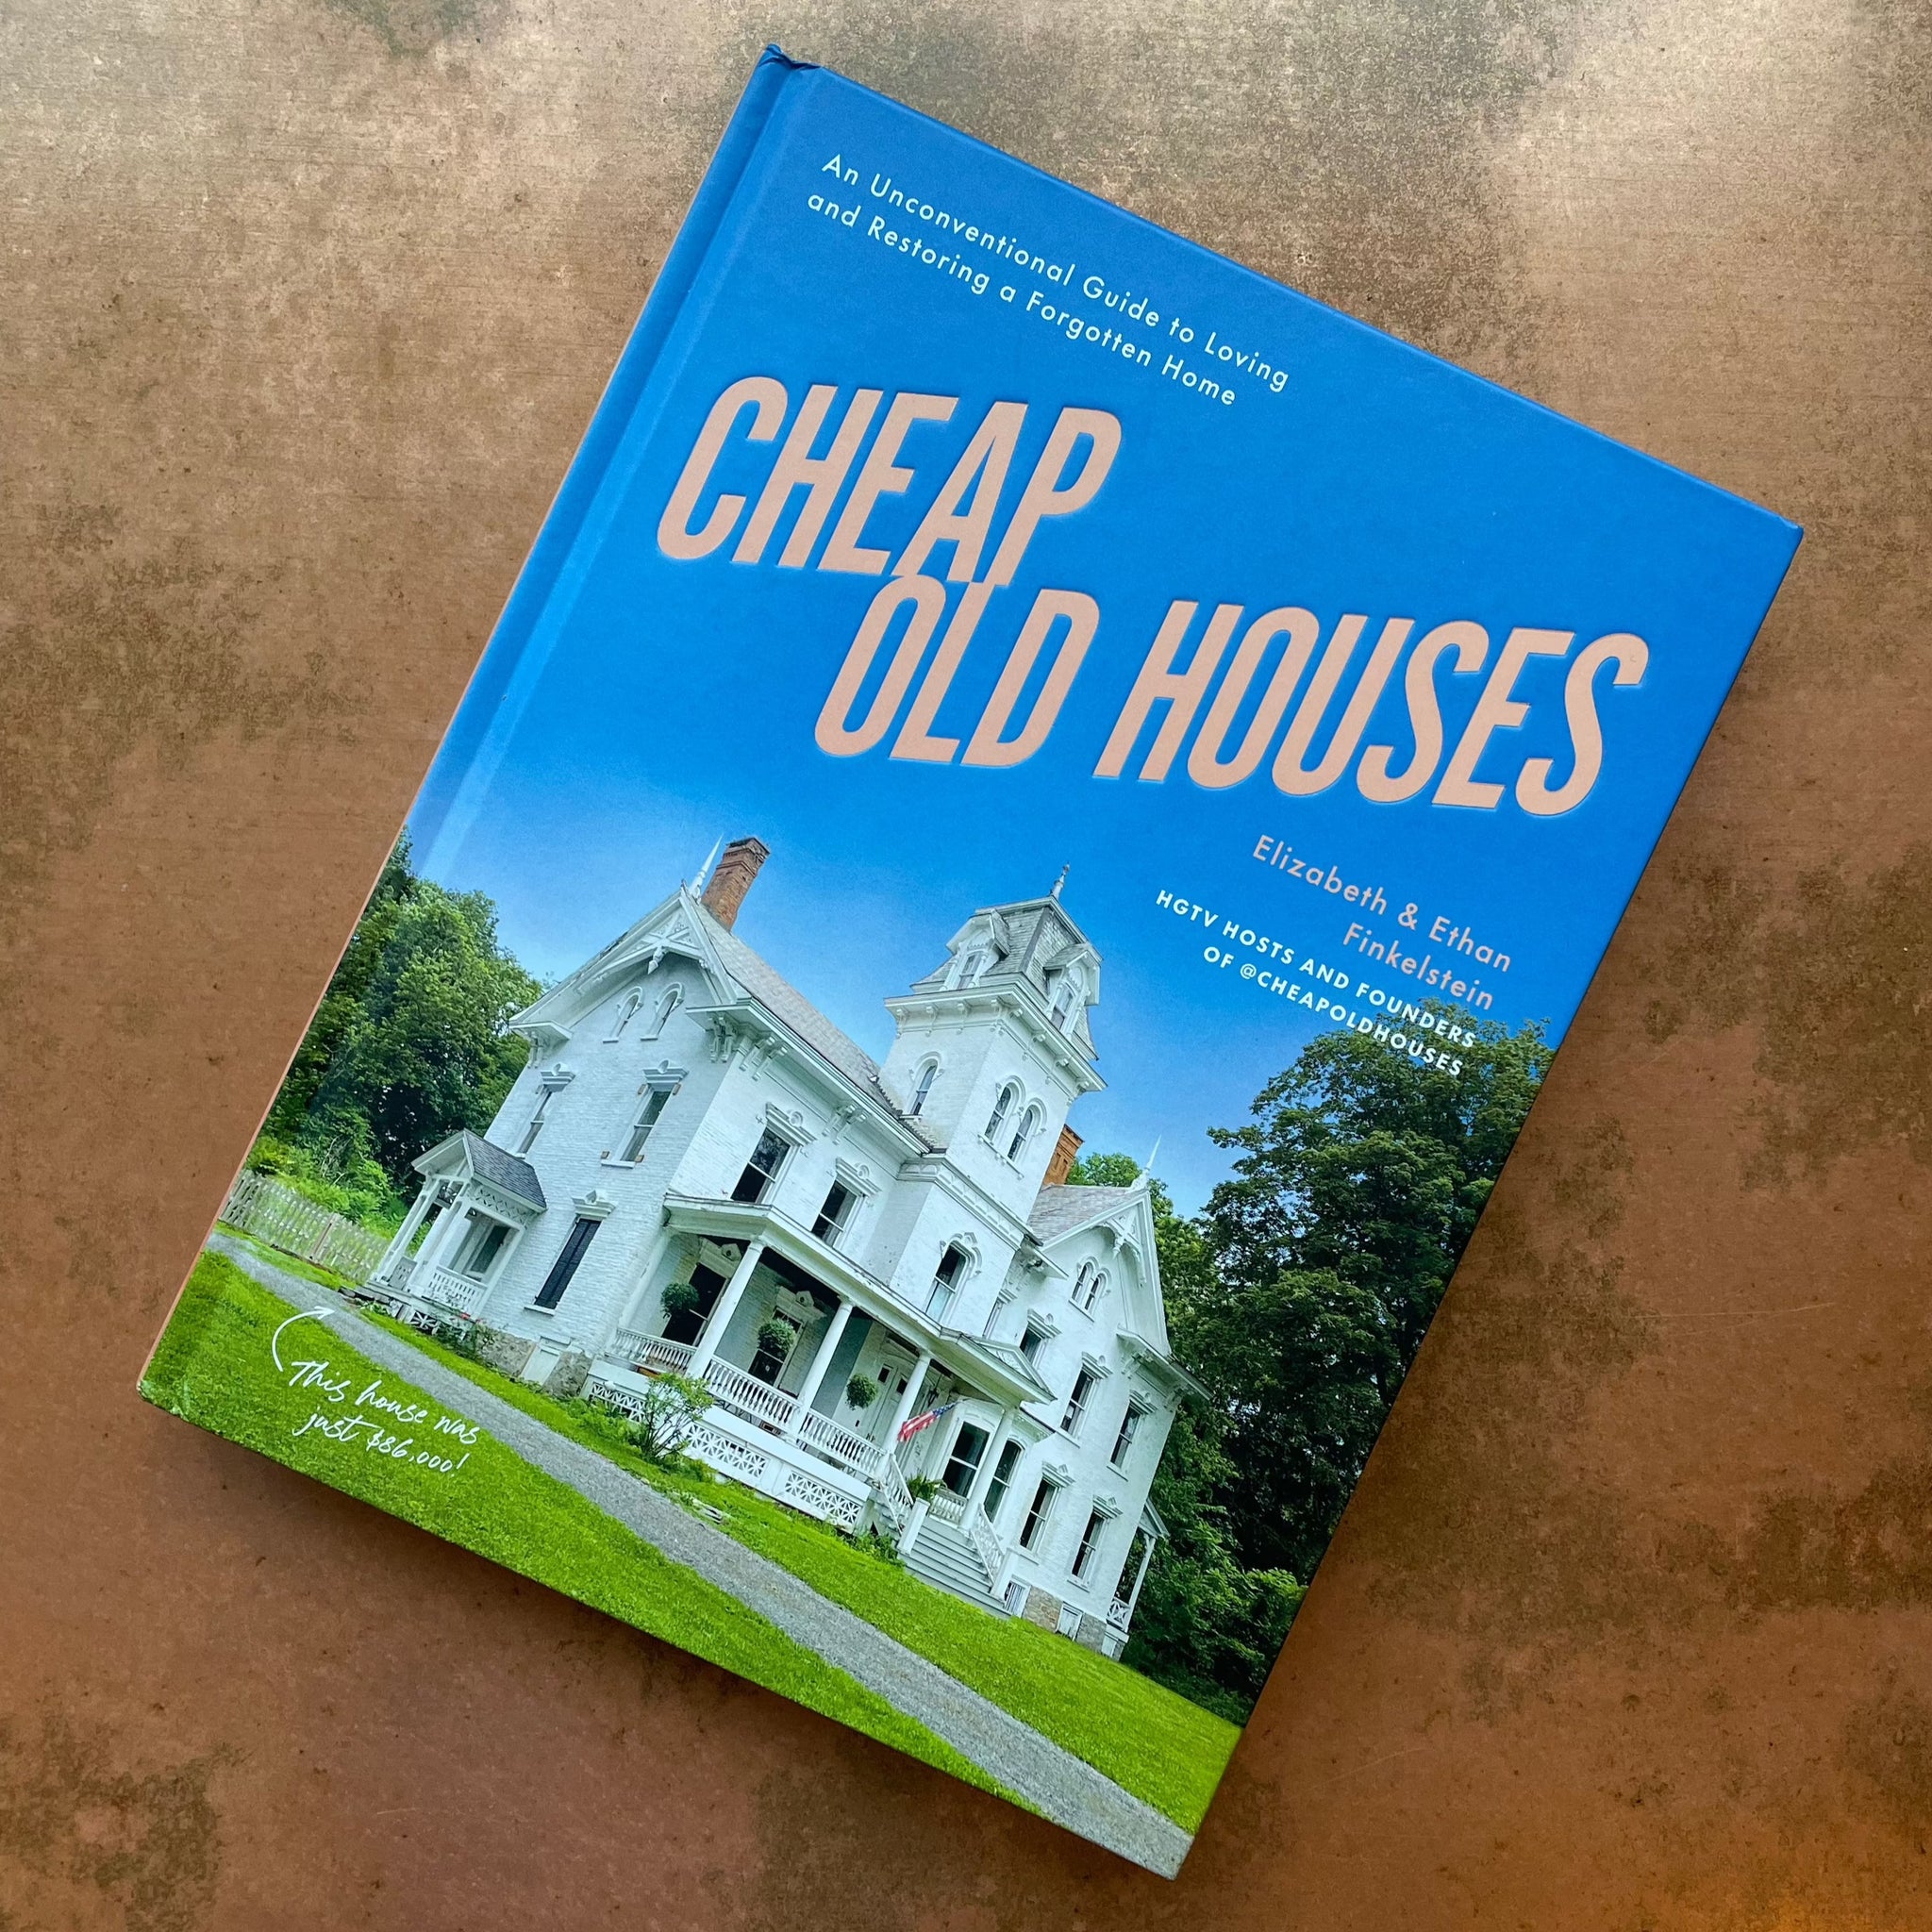 Cheap Old Houses